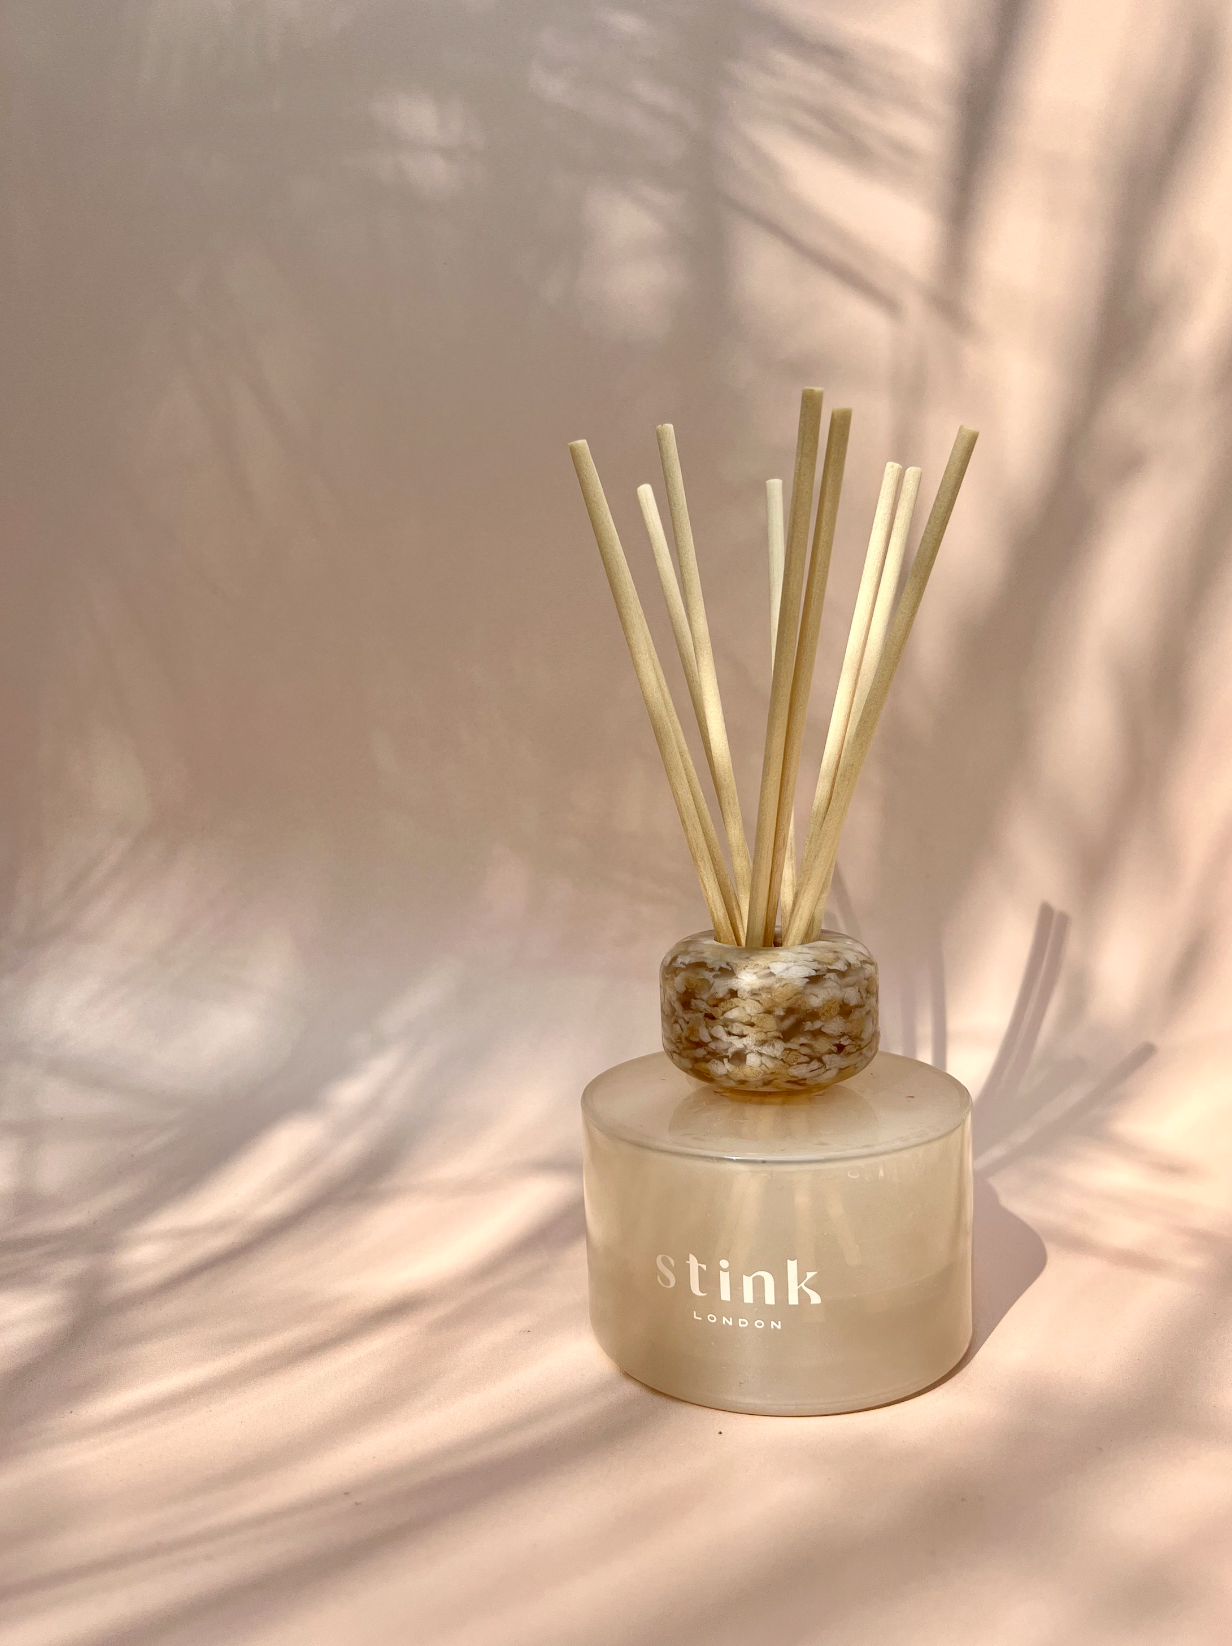 How to care for your Stink Reed Diffuser